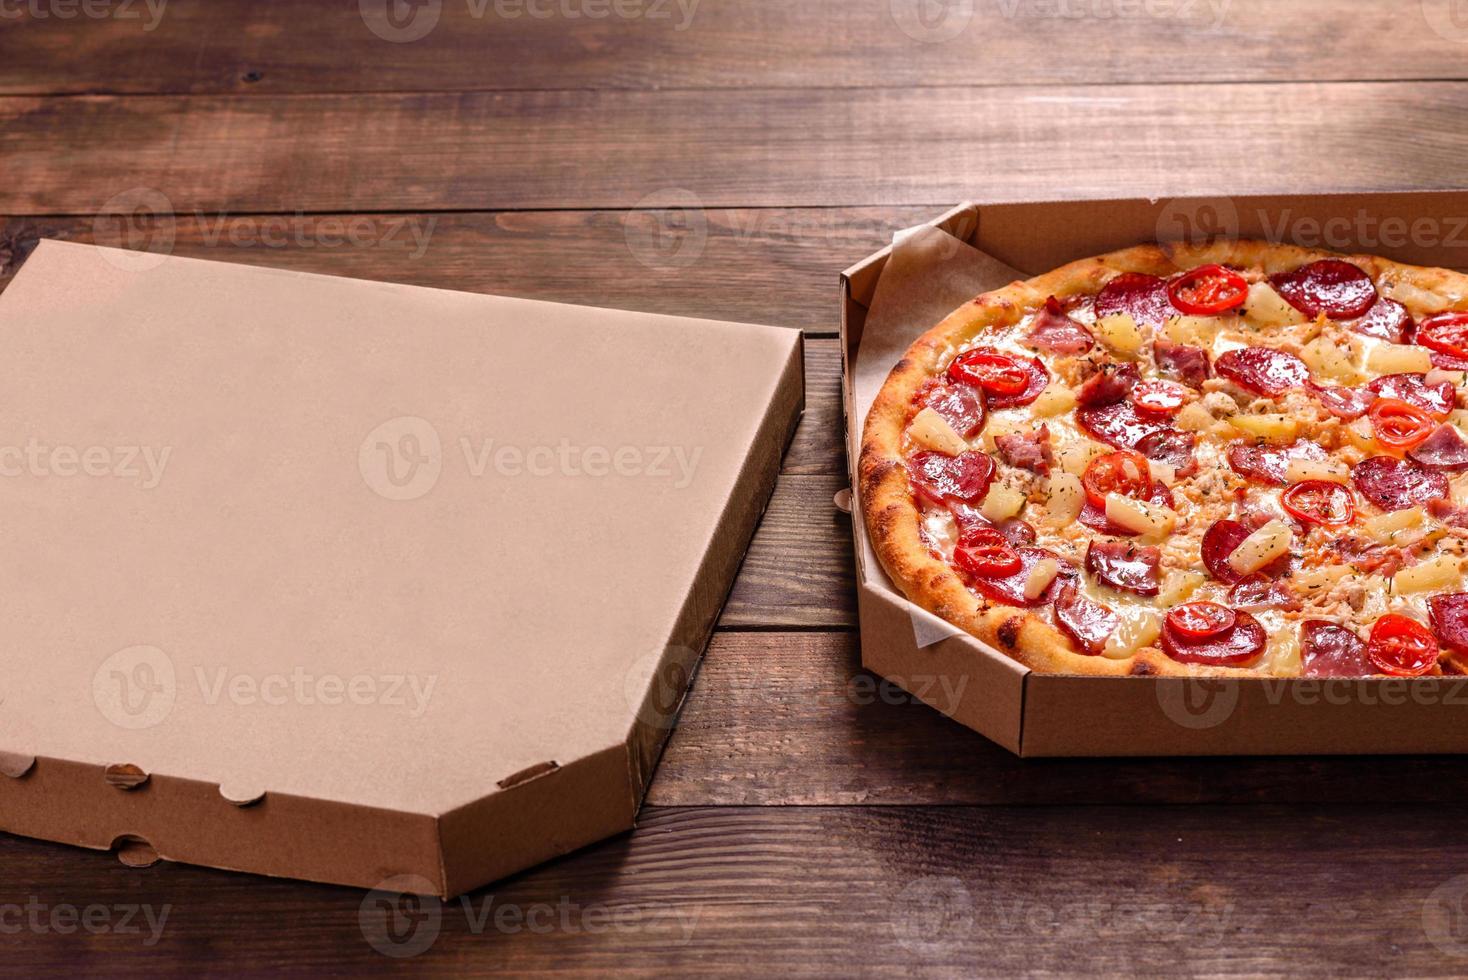 Tasty sliced pizza with seafood and tomato on a concrete background photo